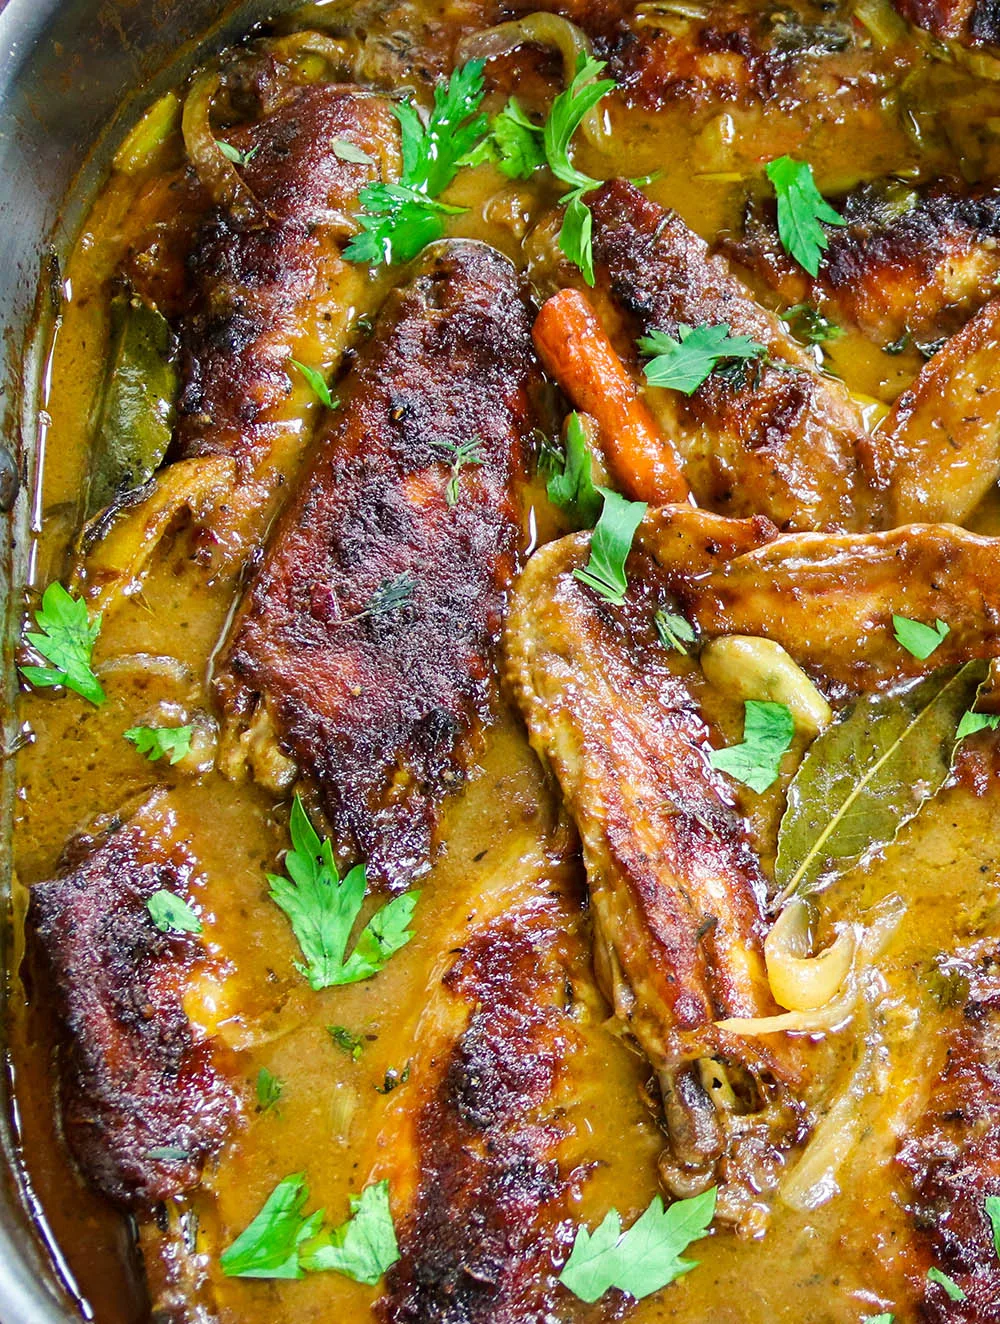 Smothered Turkey Wings - Cooked by Julie